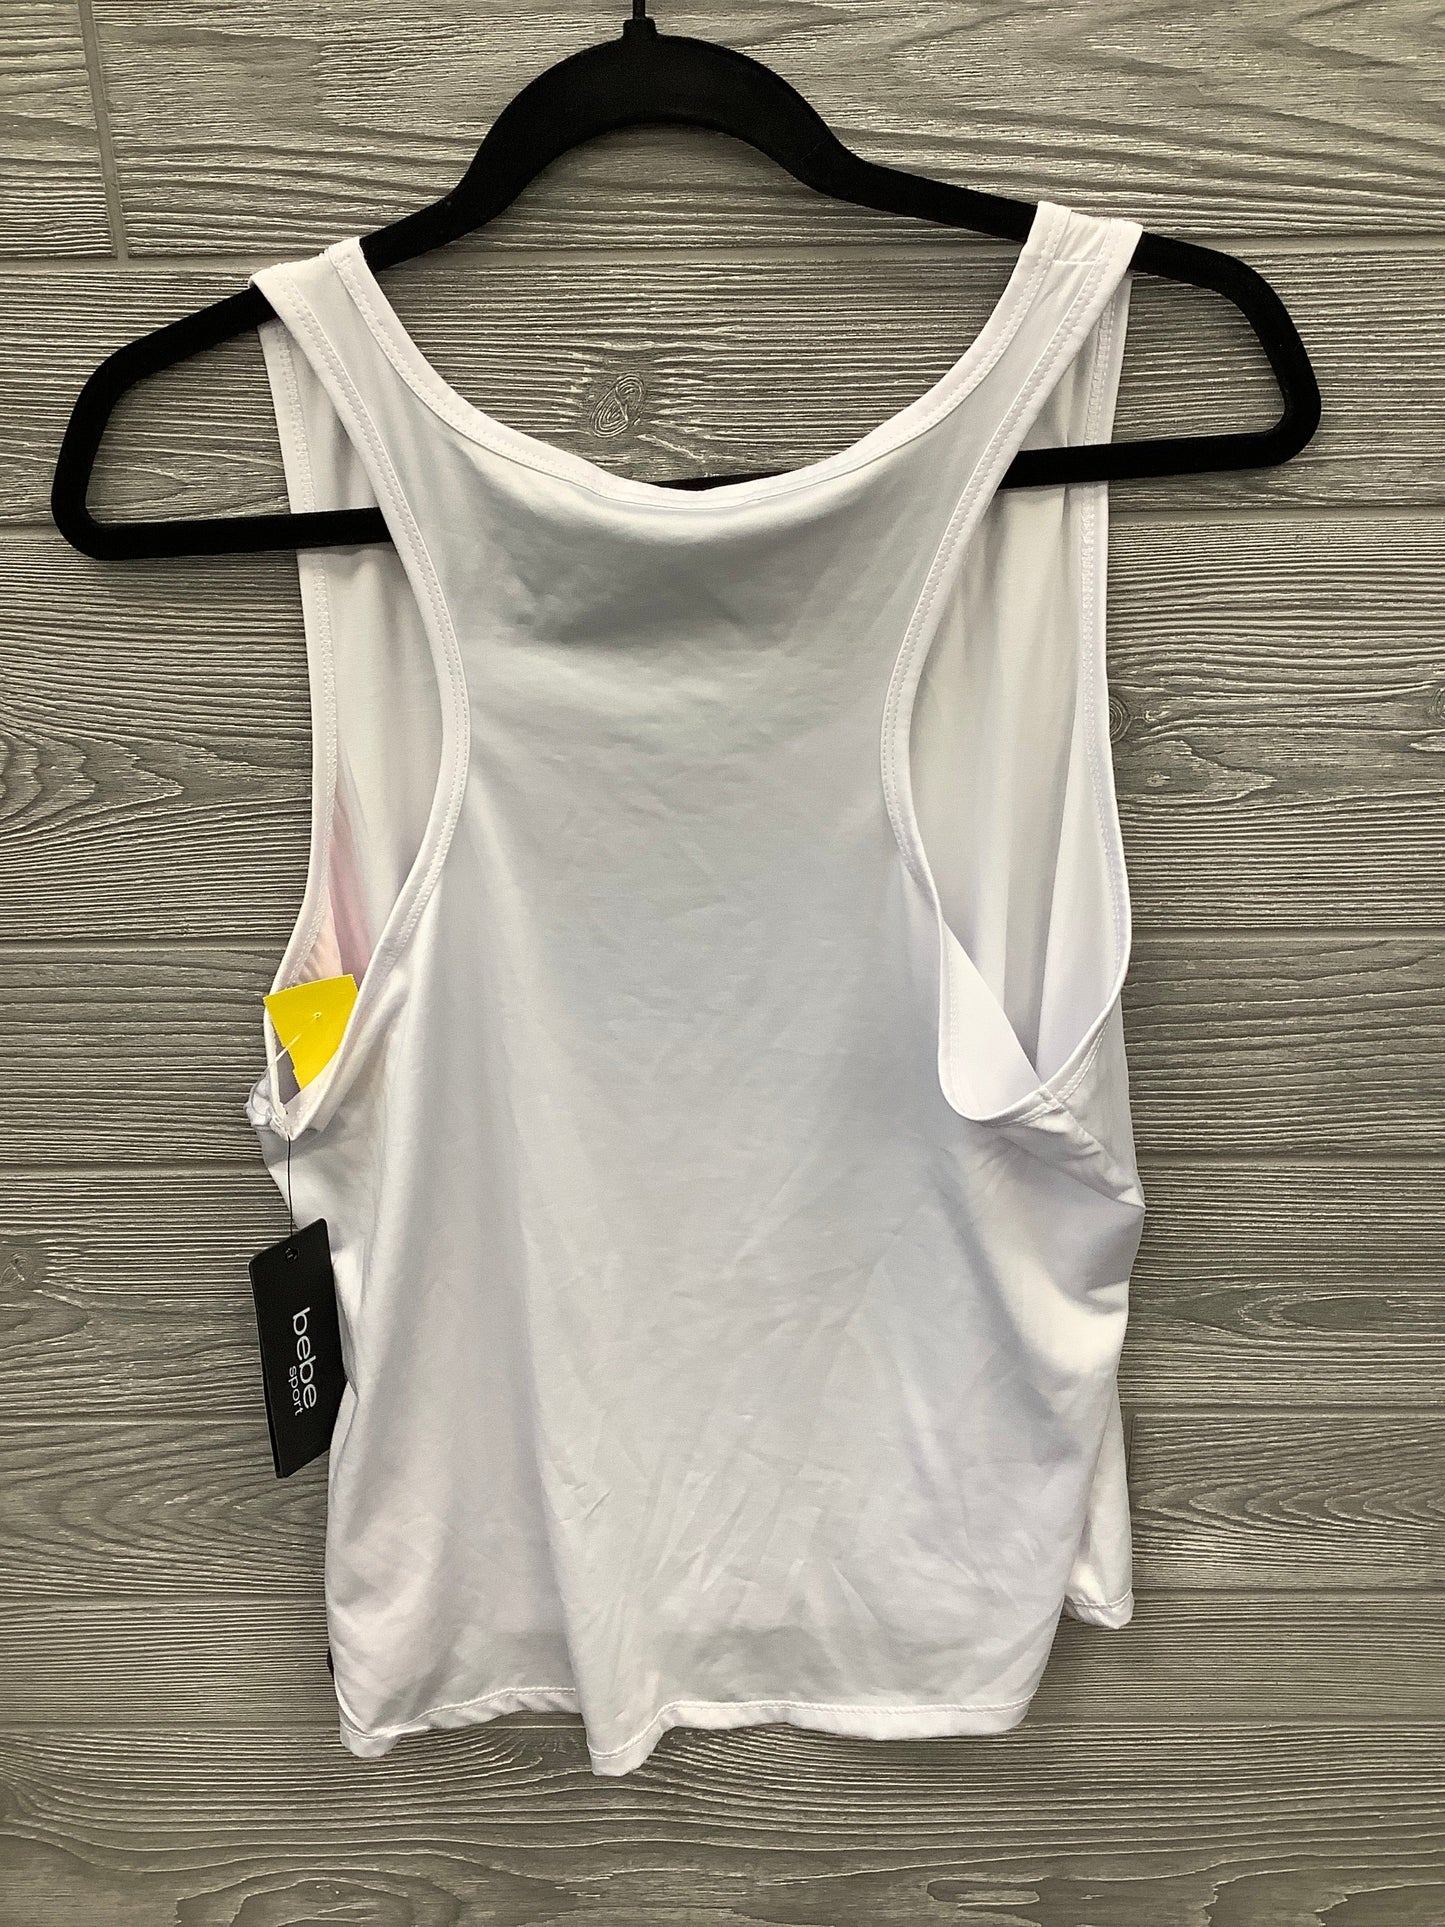 Athletic Tank Top By Bebe  Size: L